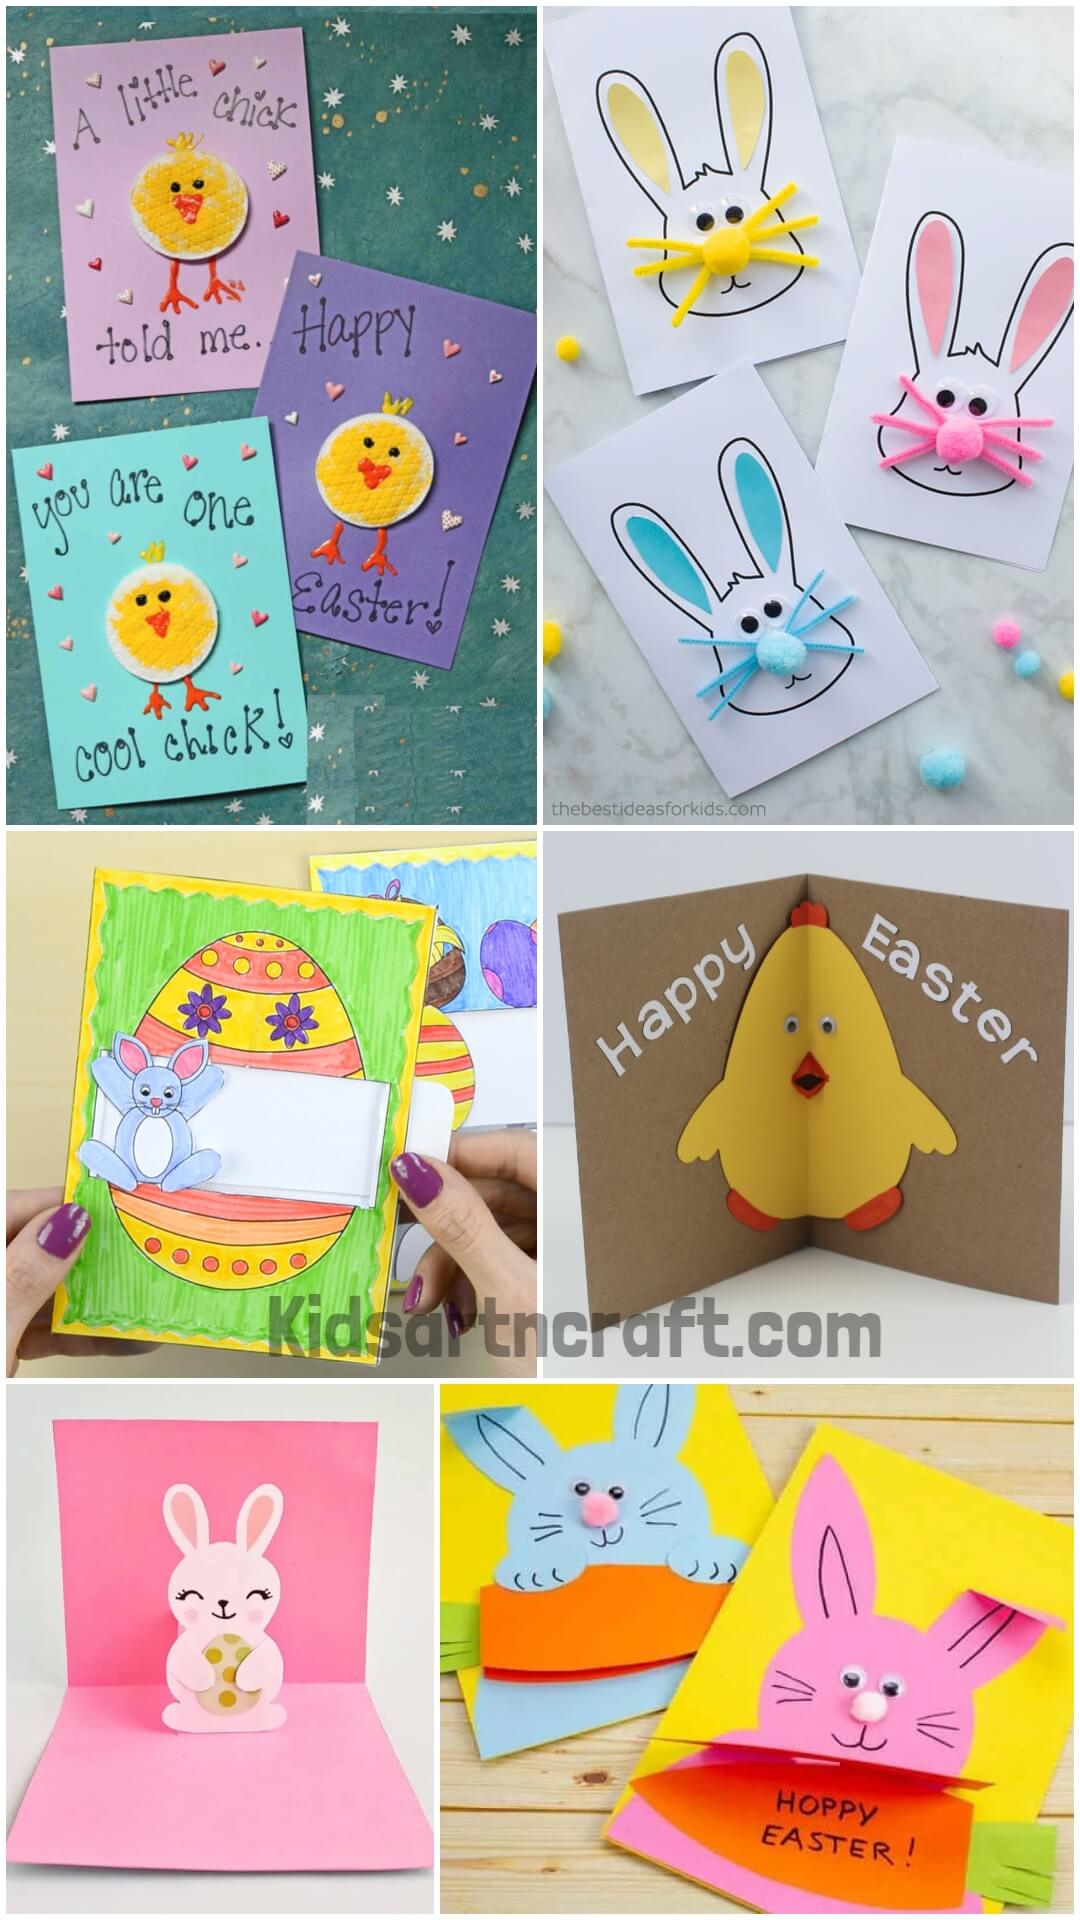 Paper Card Ideas for Easter